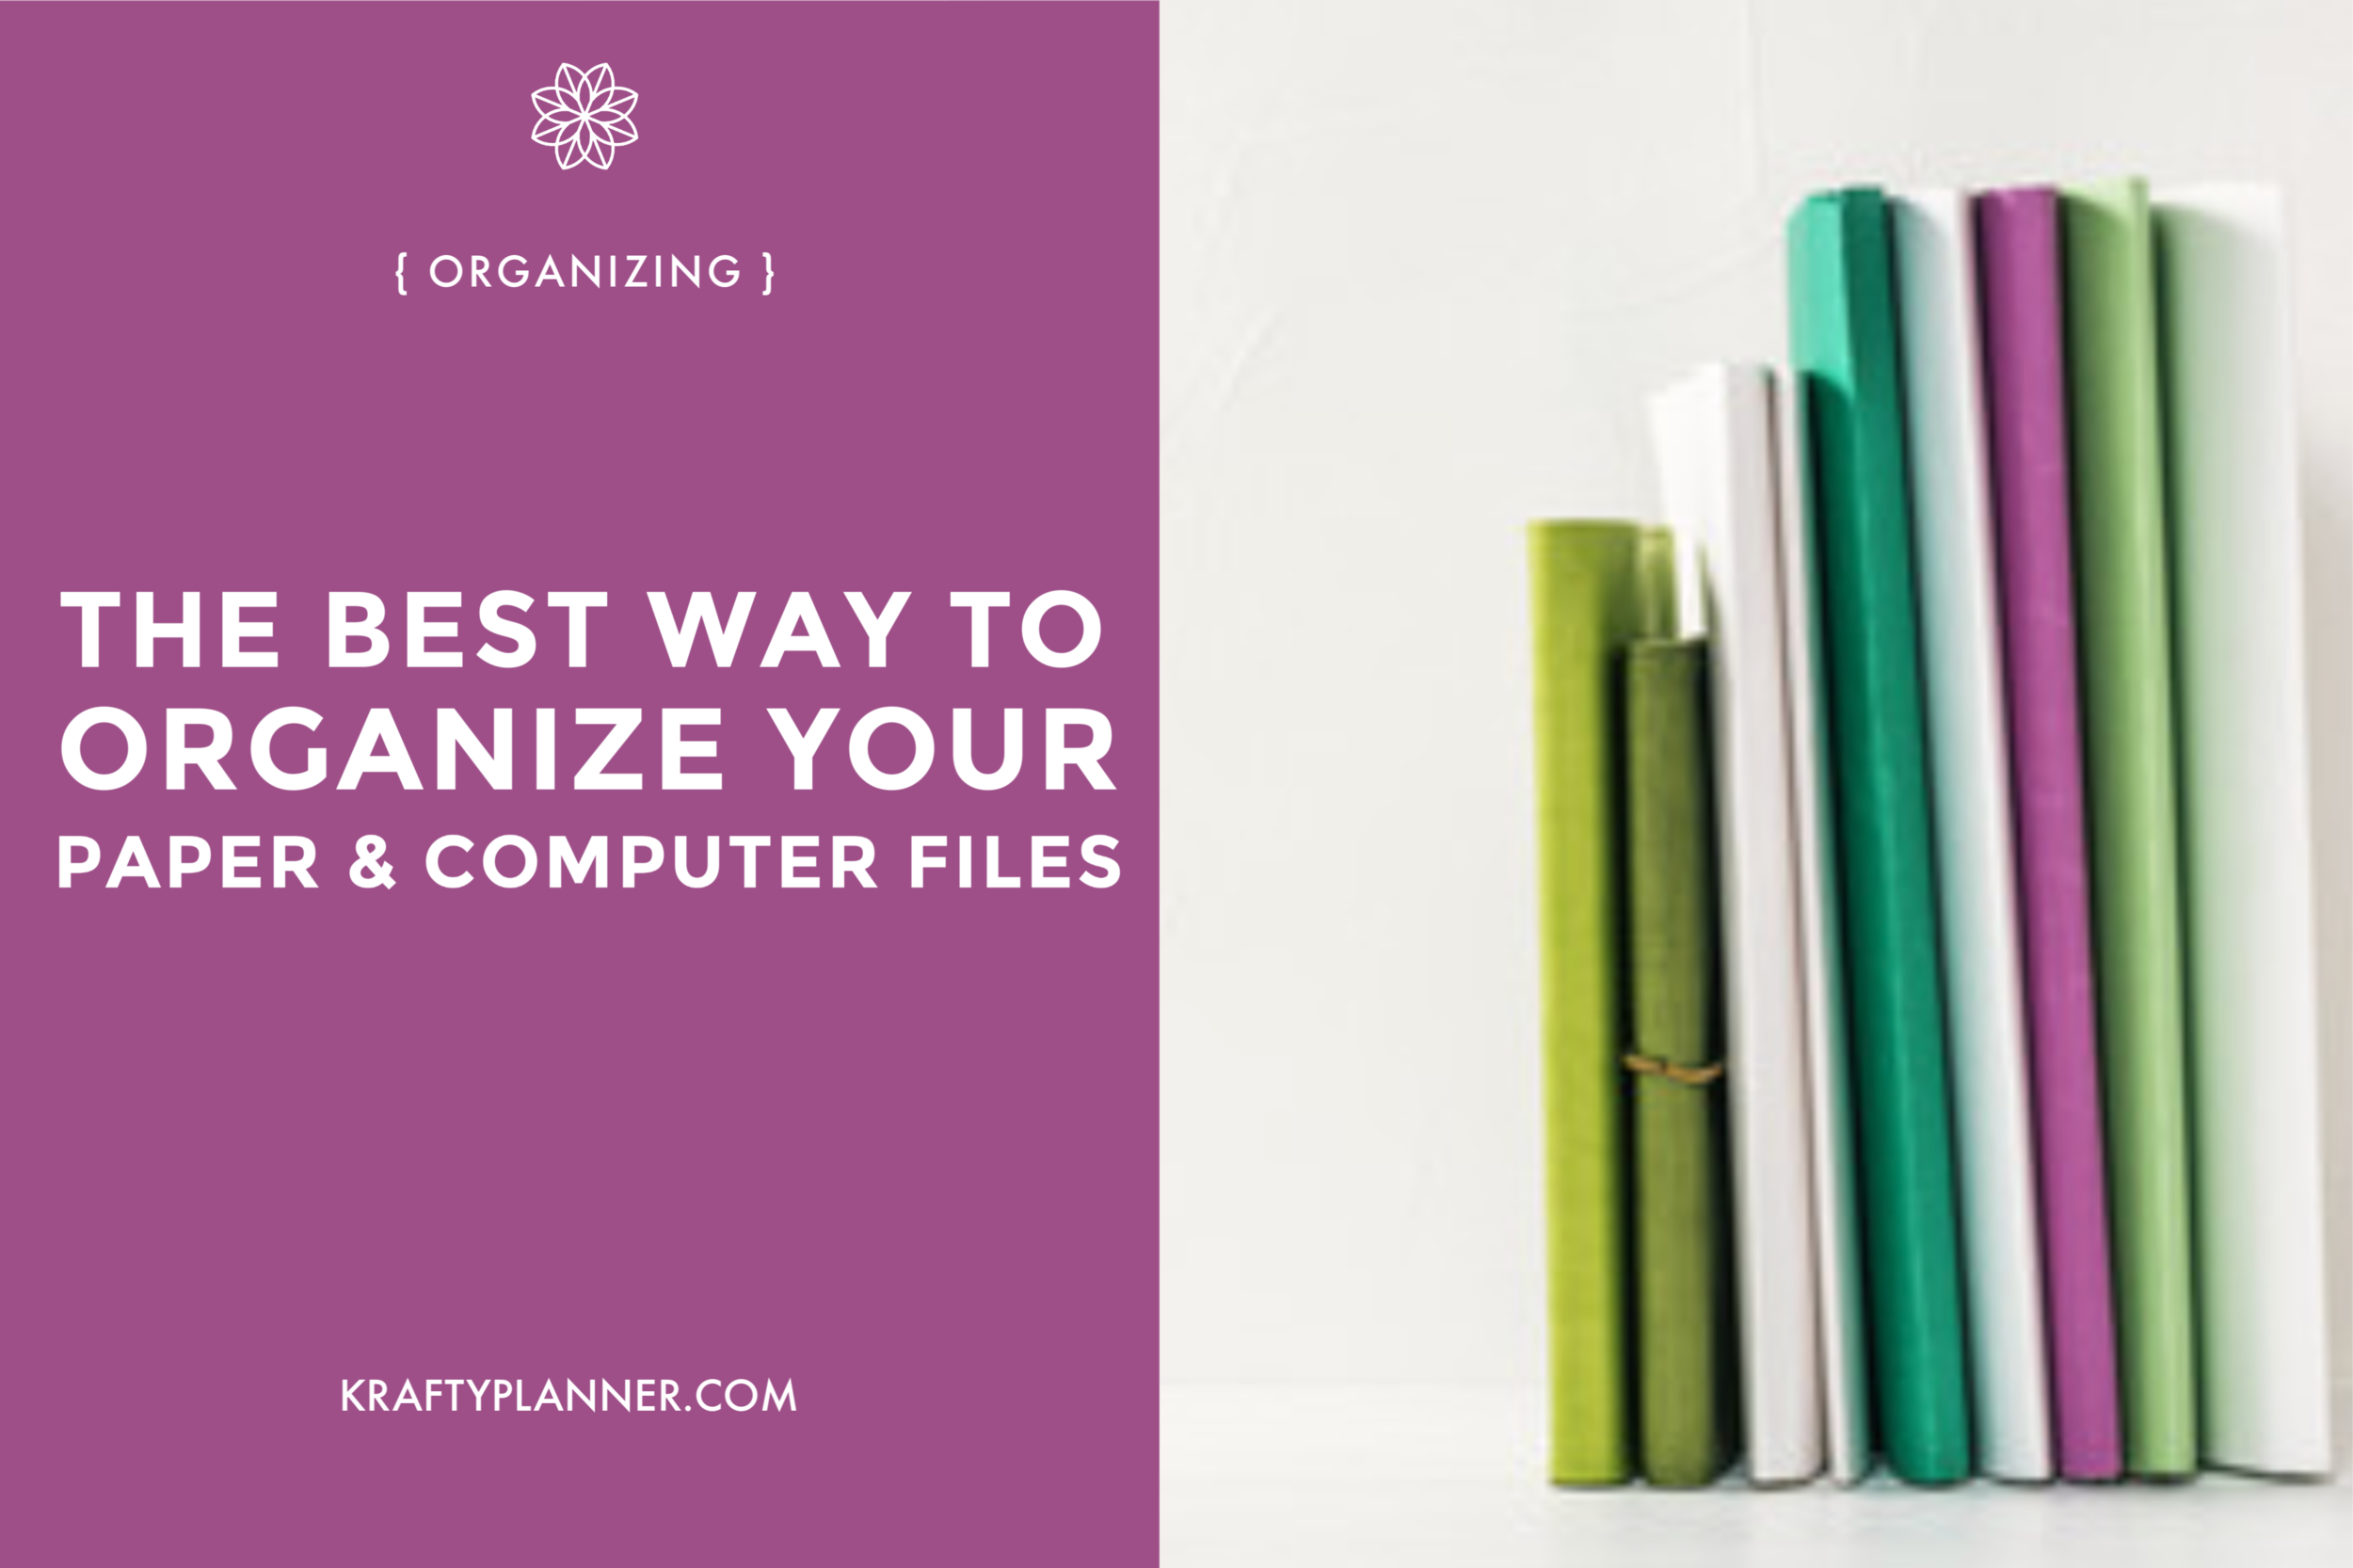 The Best Way to Organize Your Paper and Computer Files